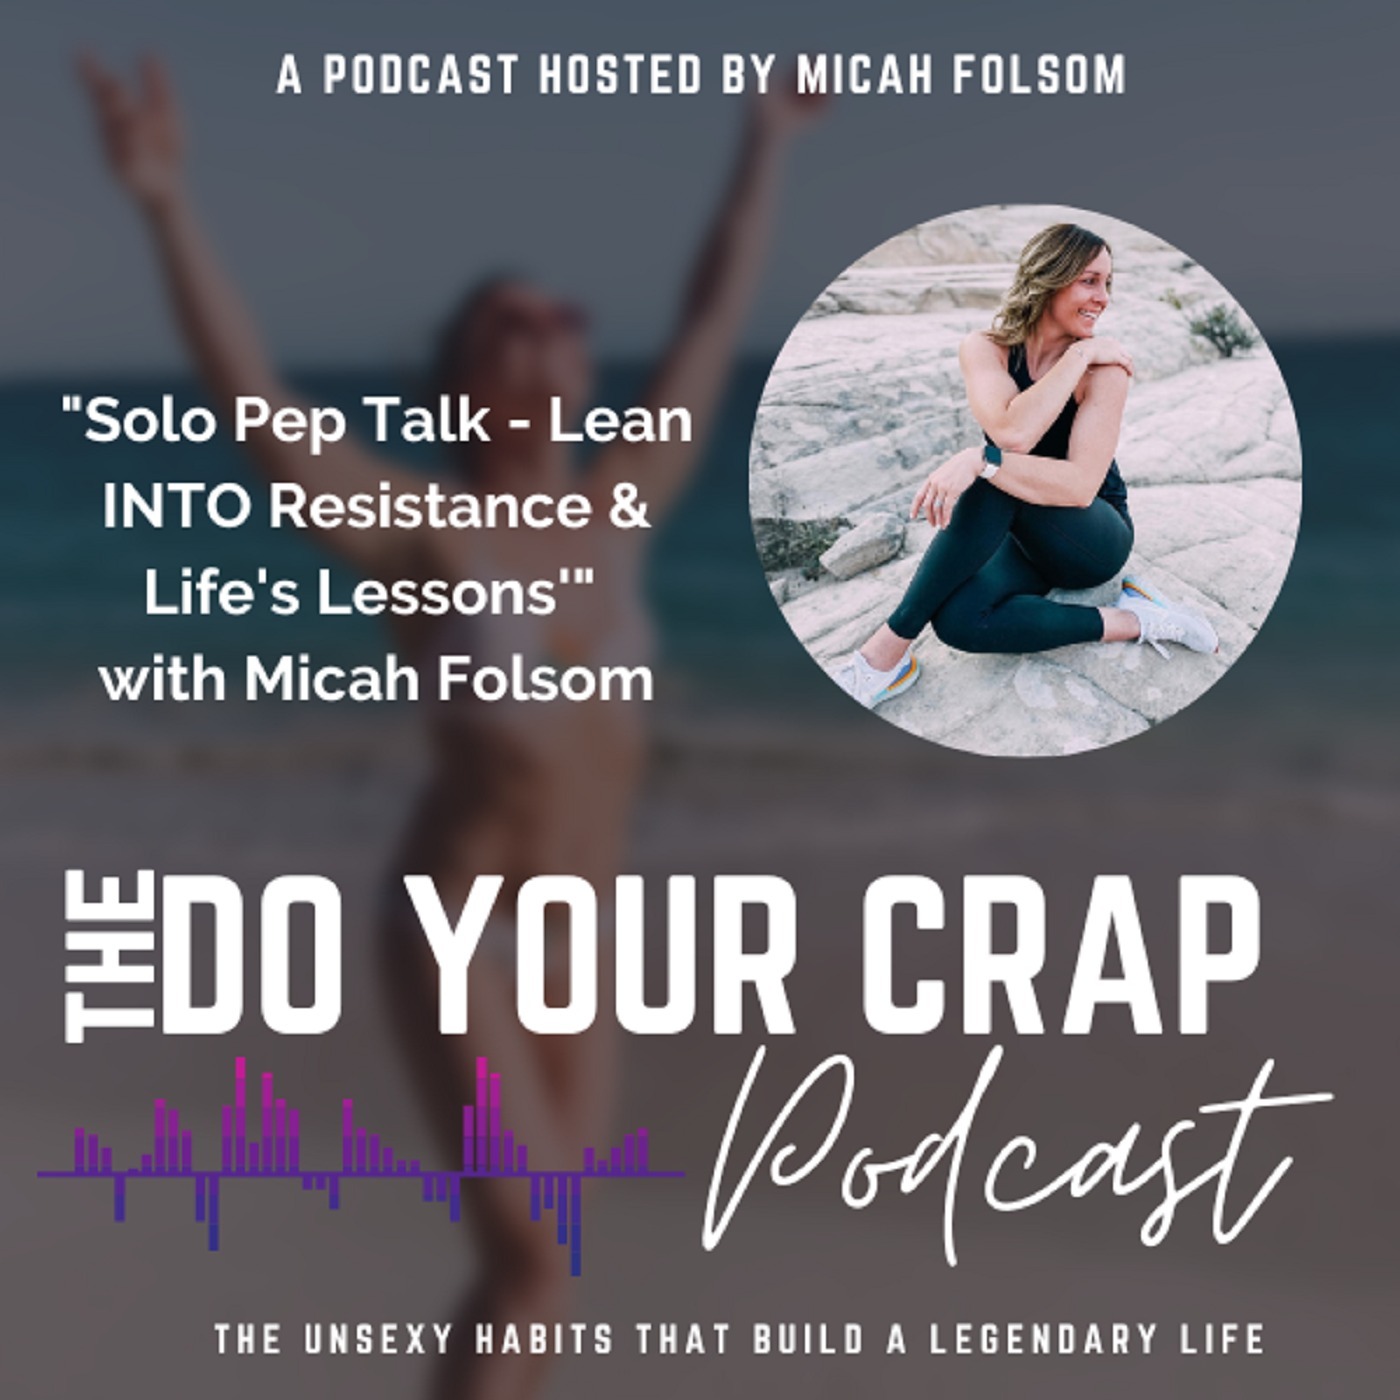 Solo Pep Talk - Lean INTO Resistance & Life's Lessons with Micah Folsom